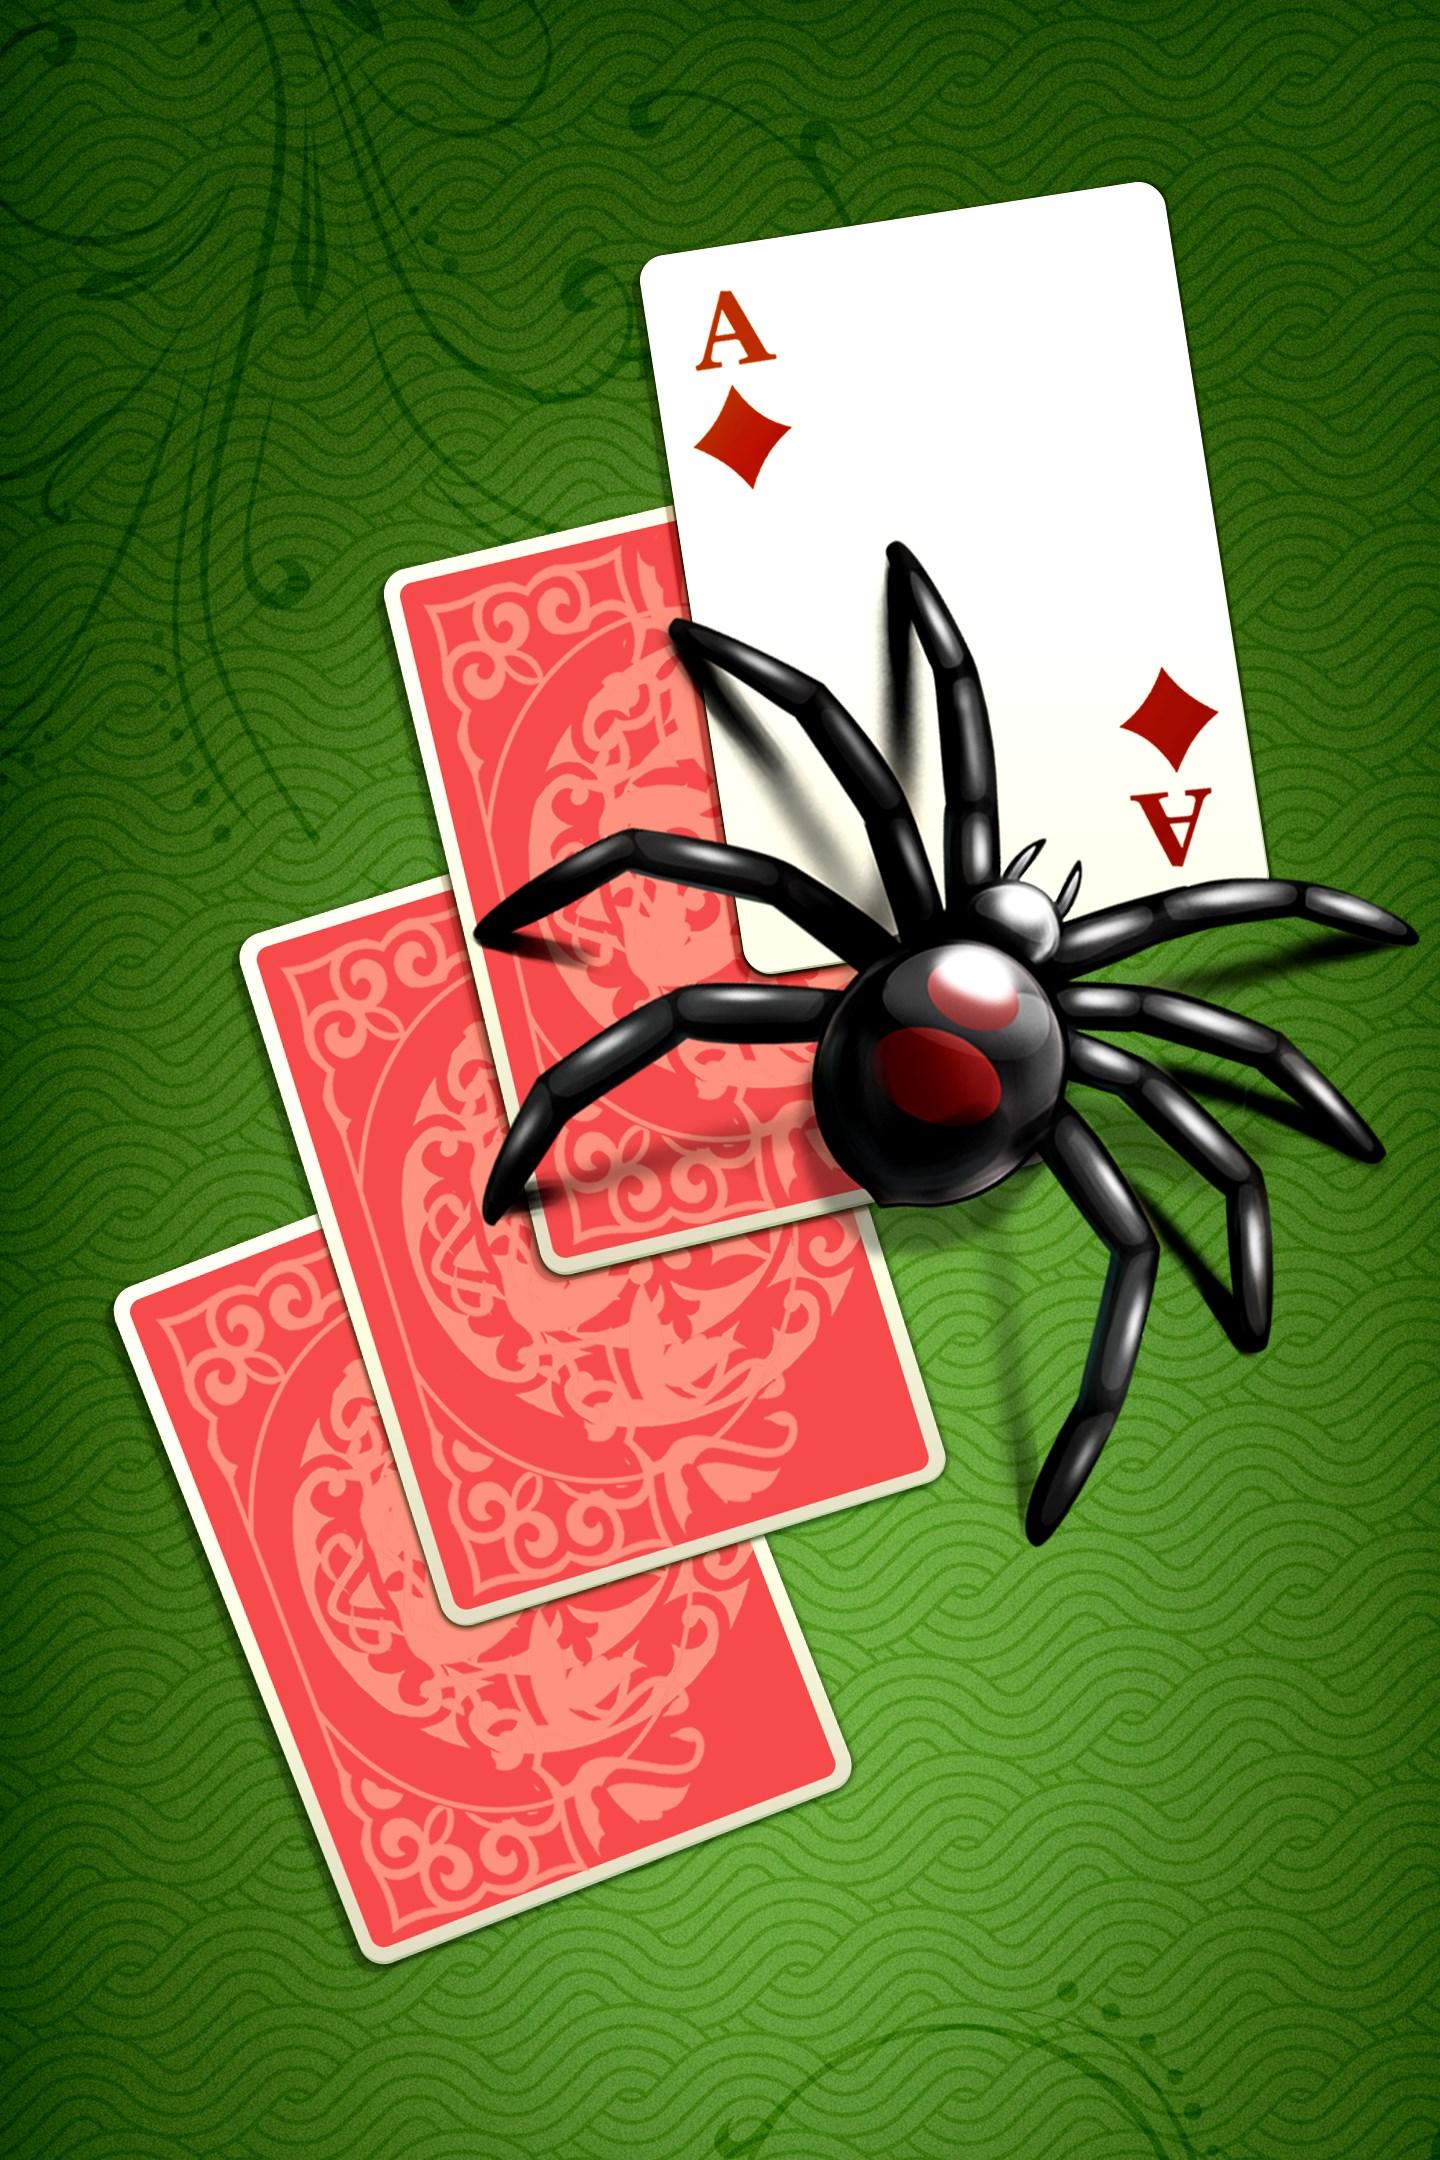 download free spider solitaire game